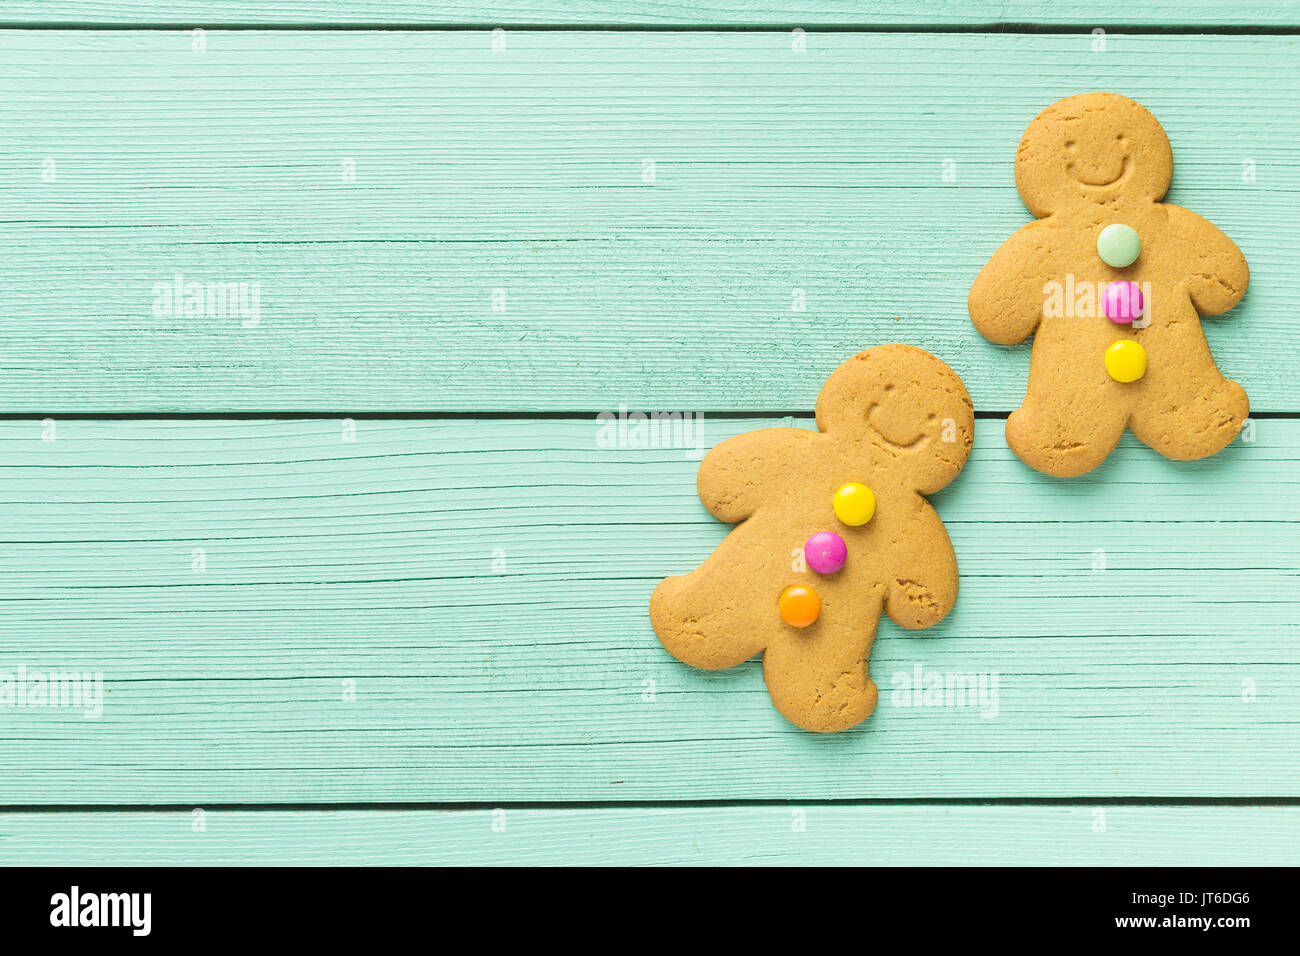 Two gingerbread men on colorful wooden table. Top view. Xmas gingerbread. Stock Photo